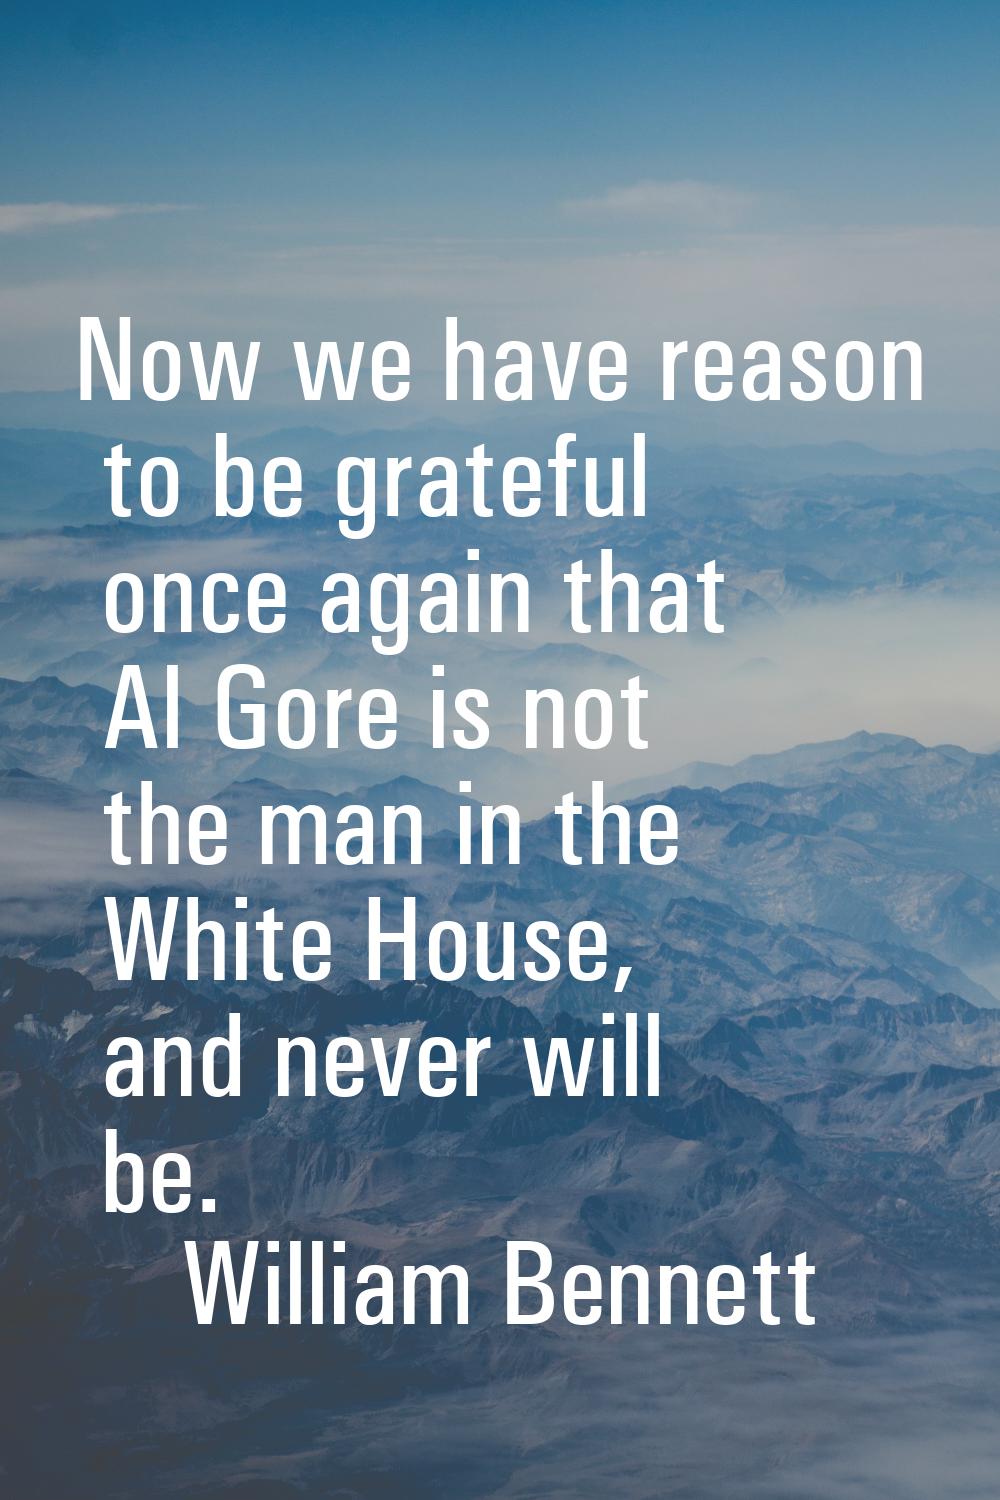 Now we have reason to be grateful once again that Al Gore is not the man in the White House, and ne